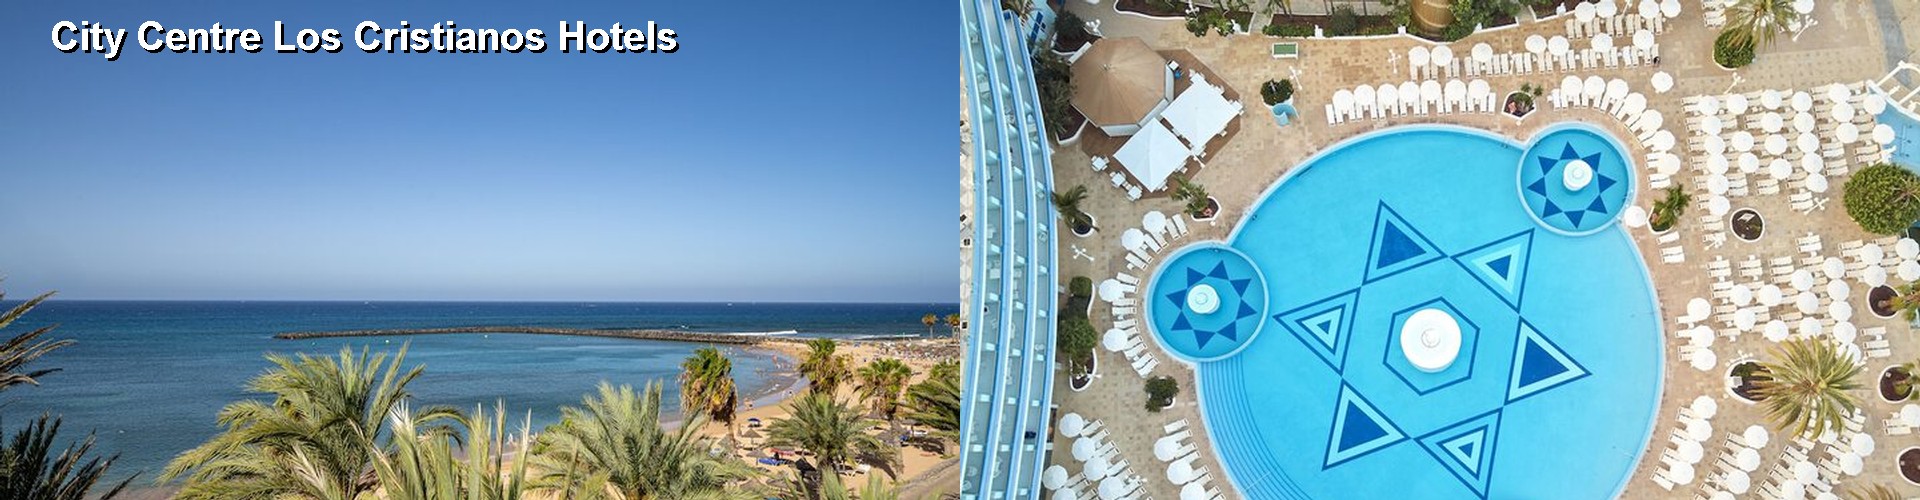 2 Best Hotels near City Centre Los Cristianos